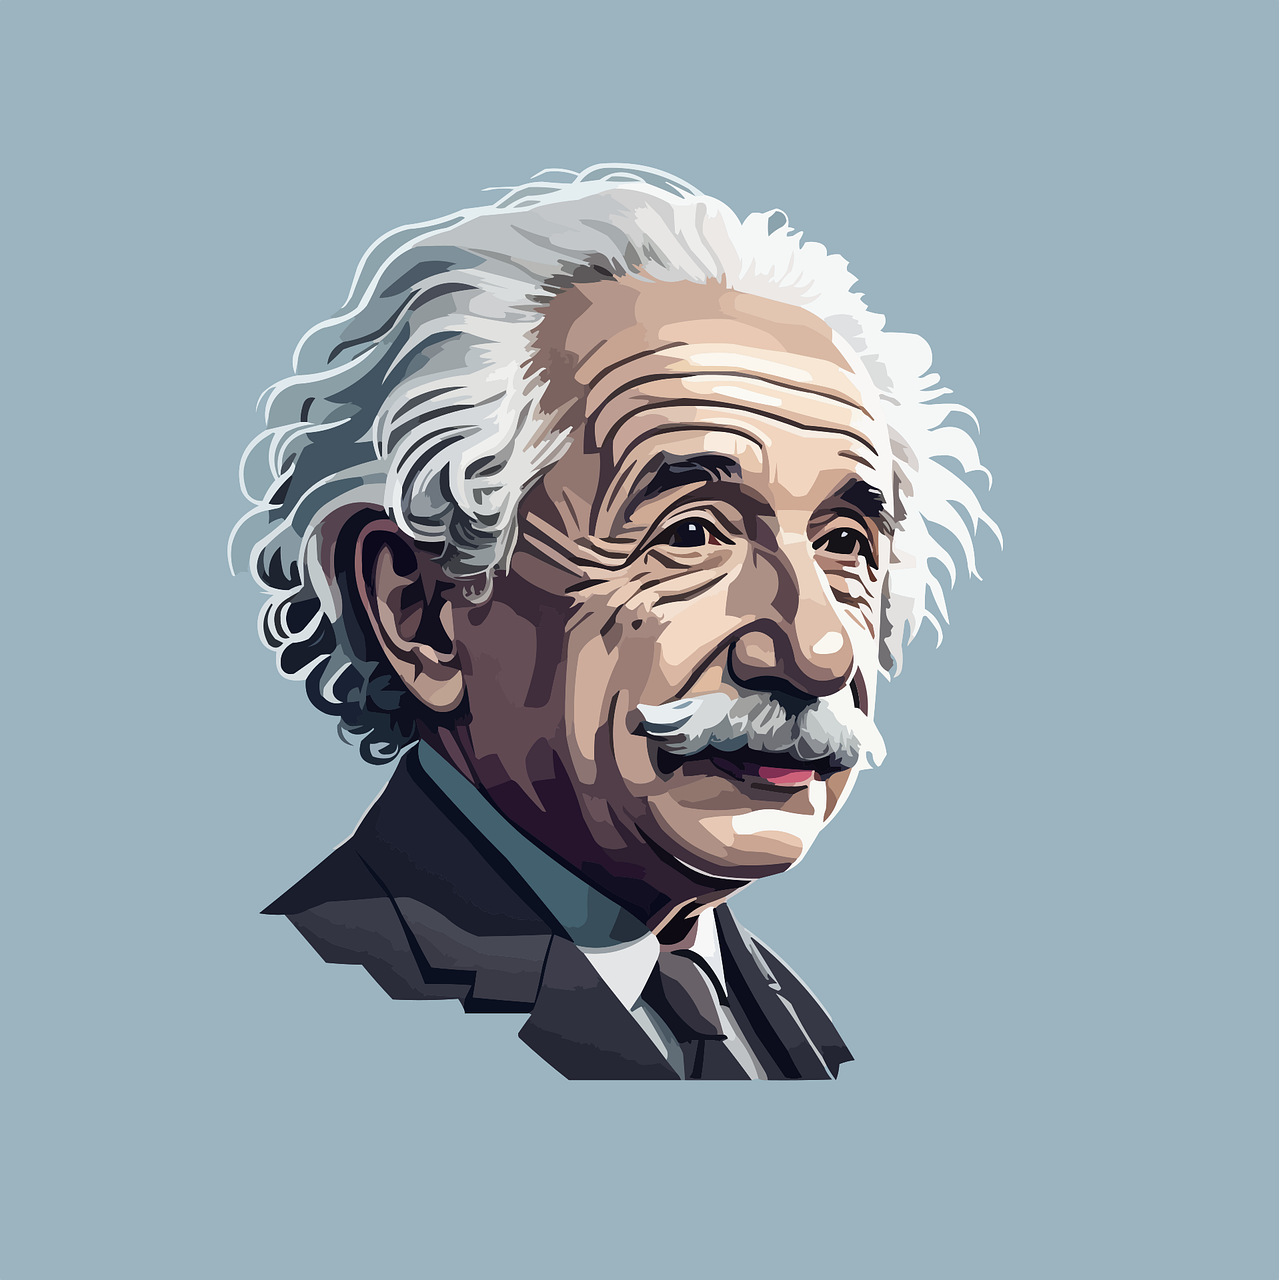 What would Albert Einstein think about artificial intelligence?